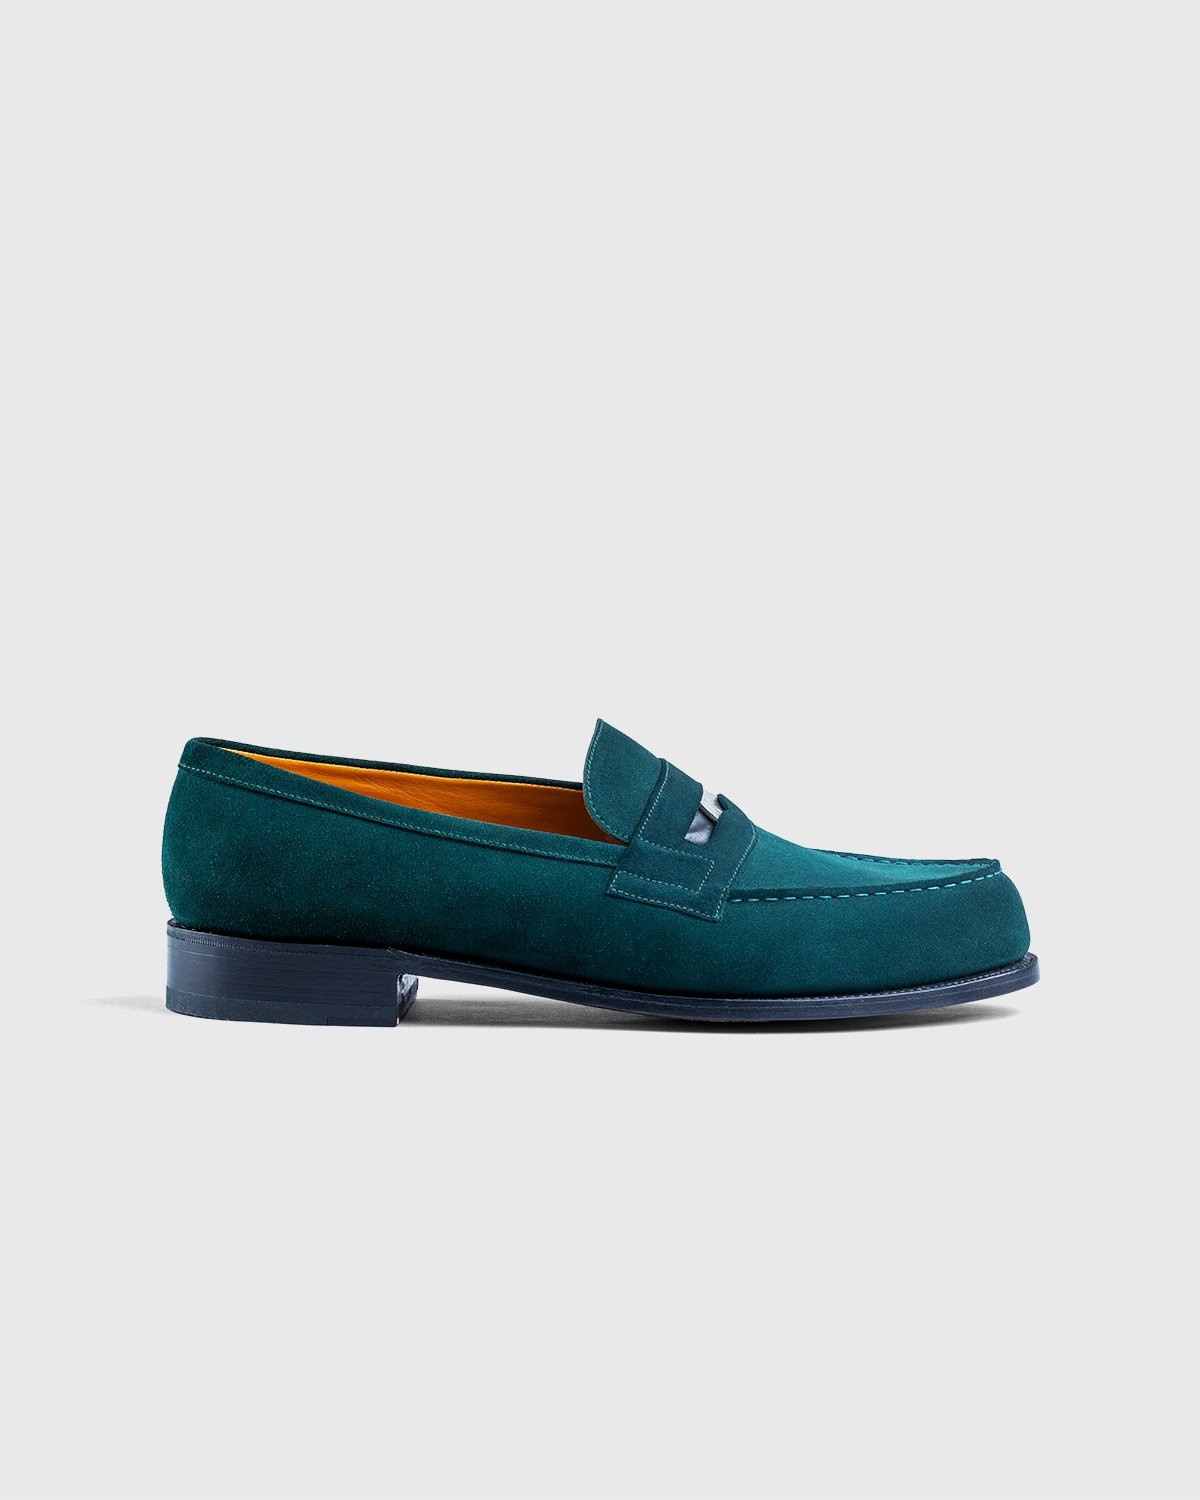 J.M. Weston x Highsnobiety – 180 'Penny' Loafer - Loafers - Green - Image 1